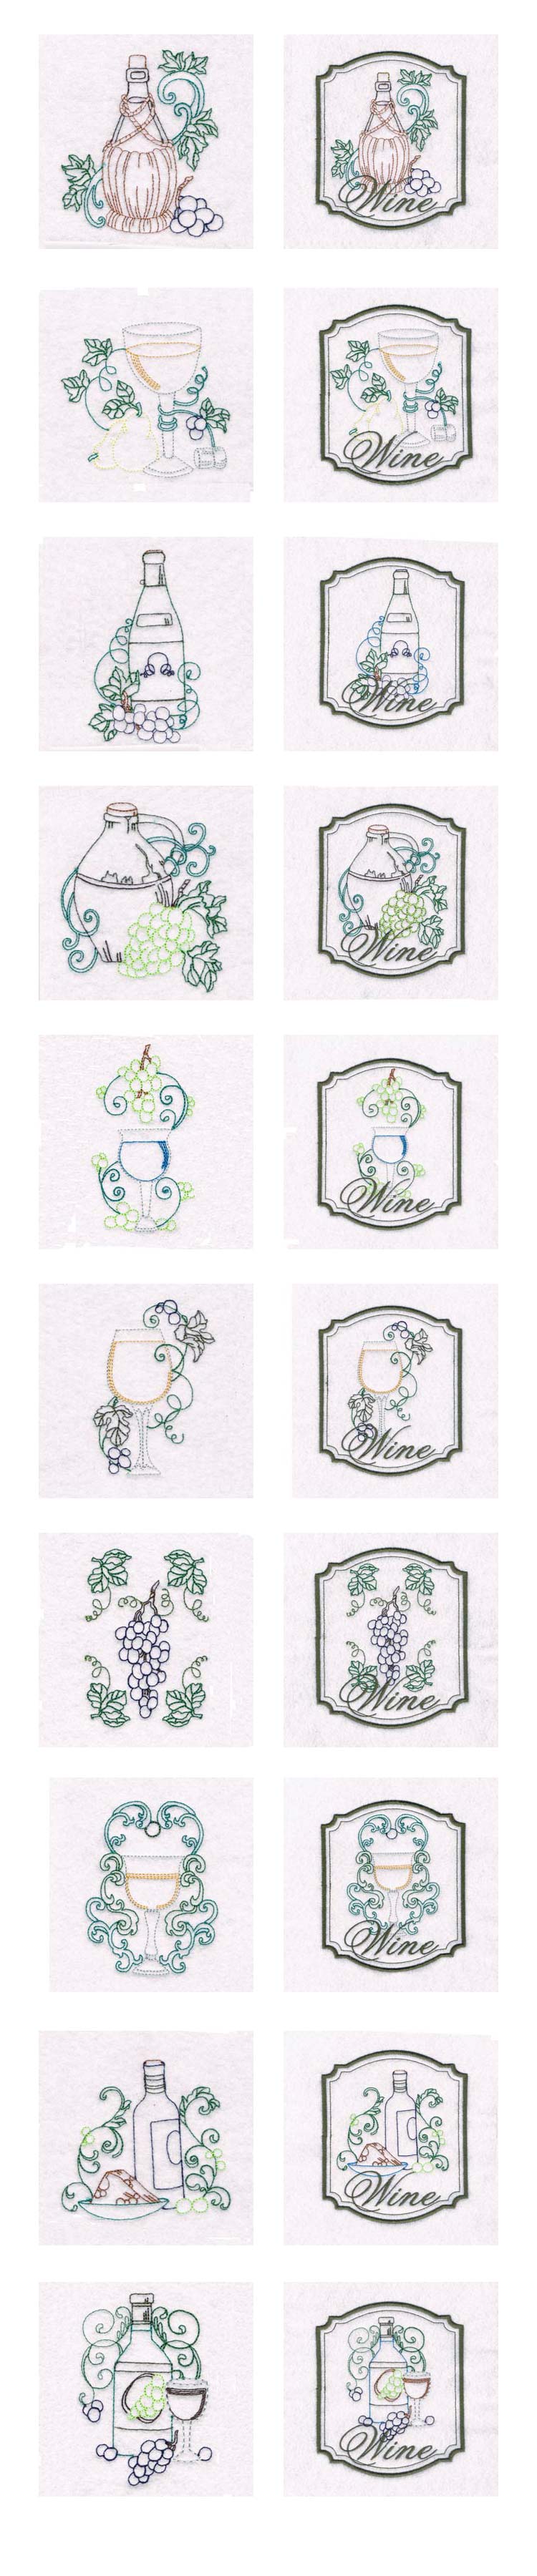 Wine Country Embroidery Machine Design Details